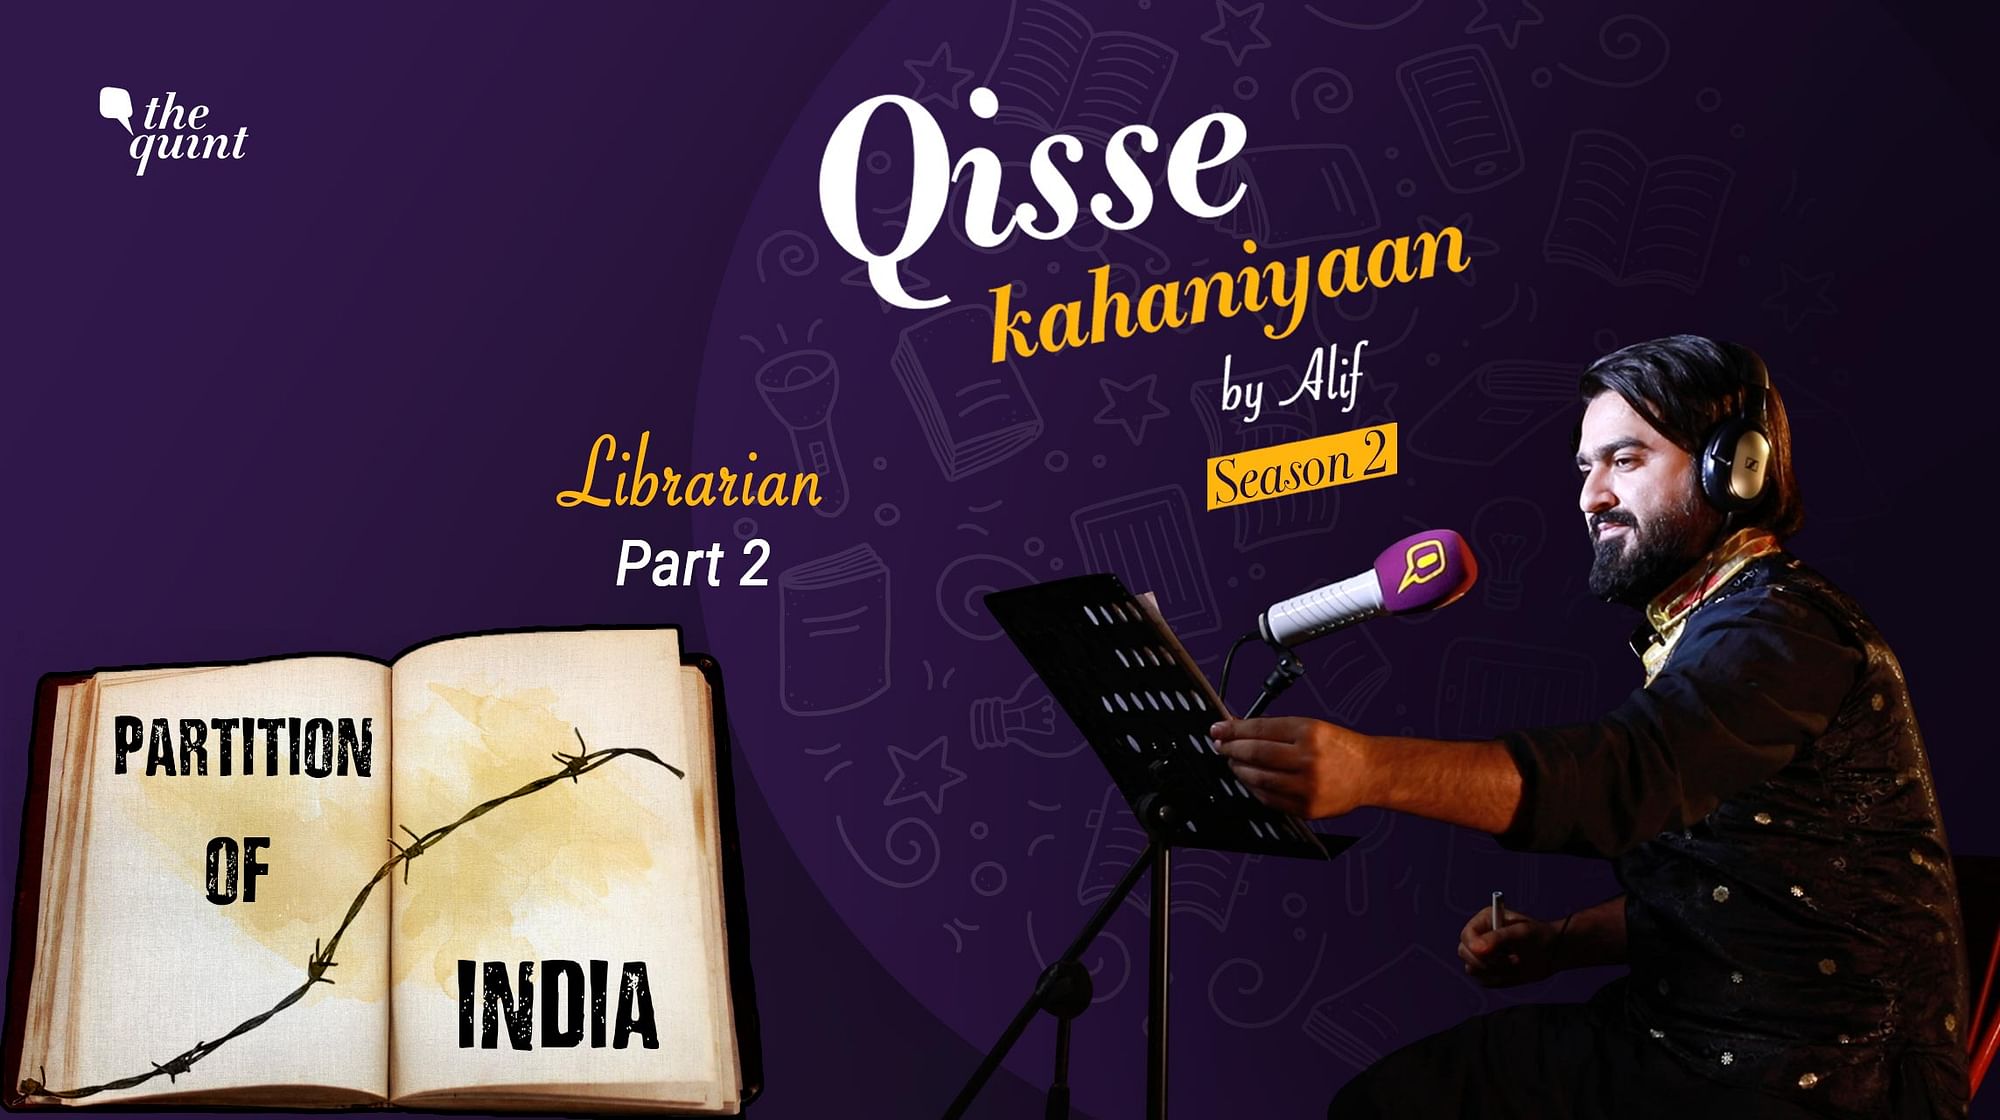 <div class="paragraphs"><p>Tune in to this episode of Qisse Kahaniyaan.</p></div>